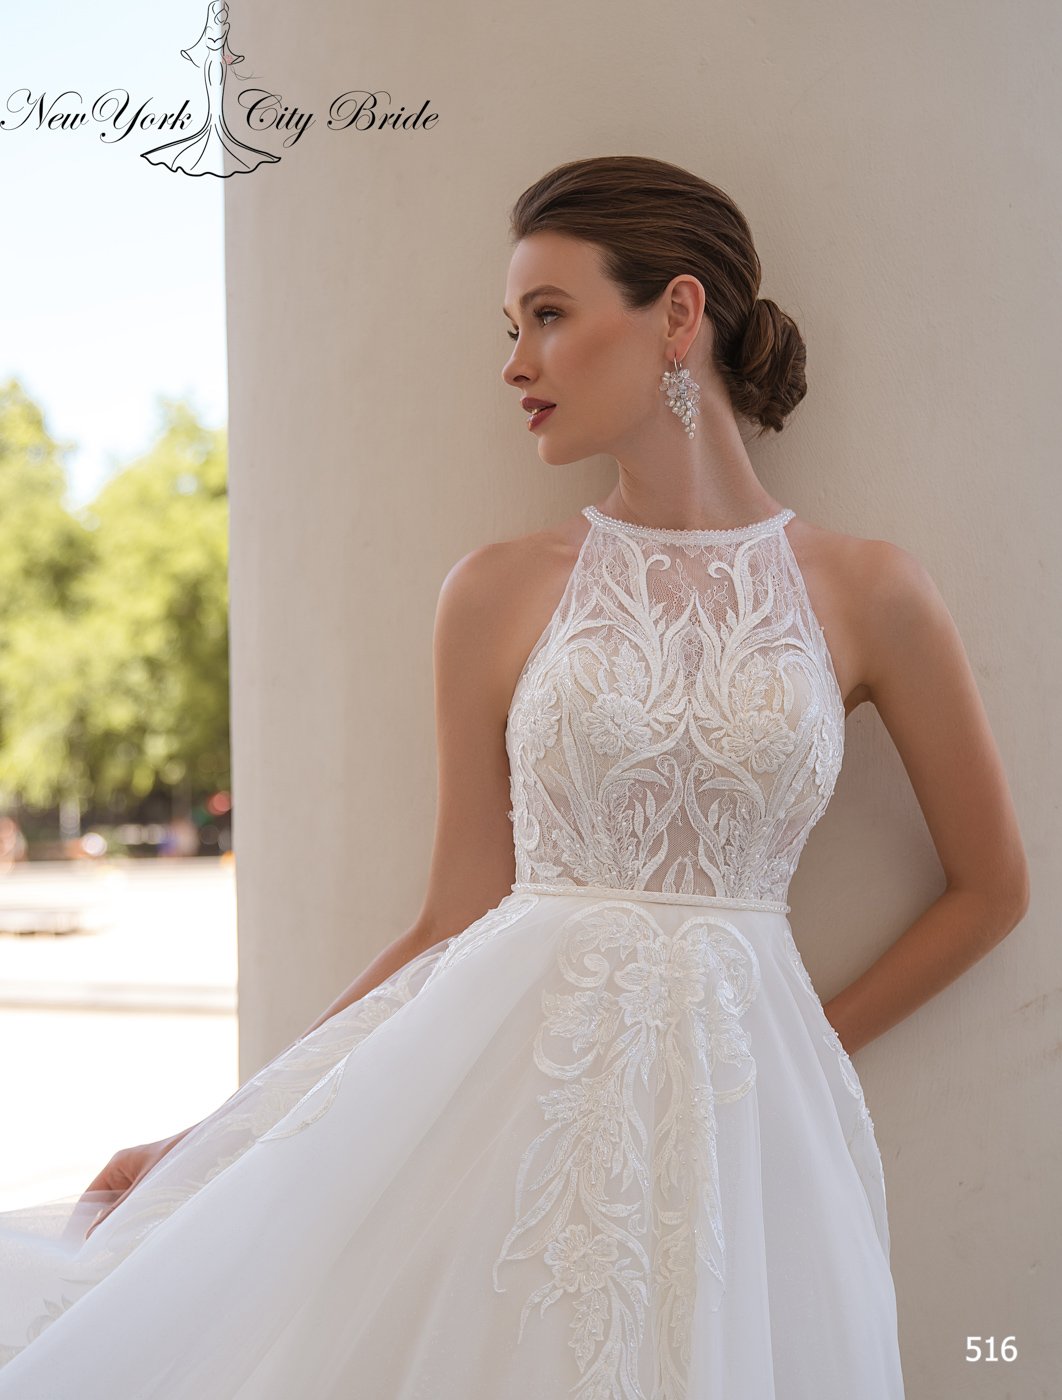 Wedding dress Remy for Sale at NY City Bride